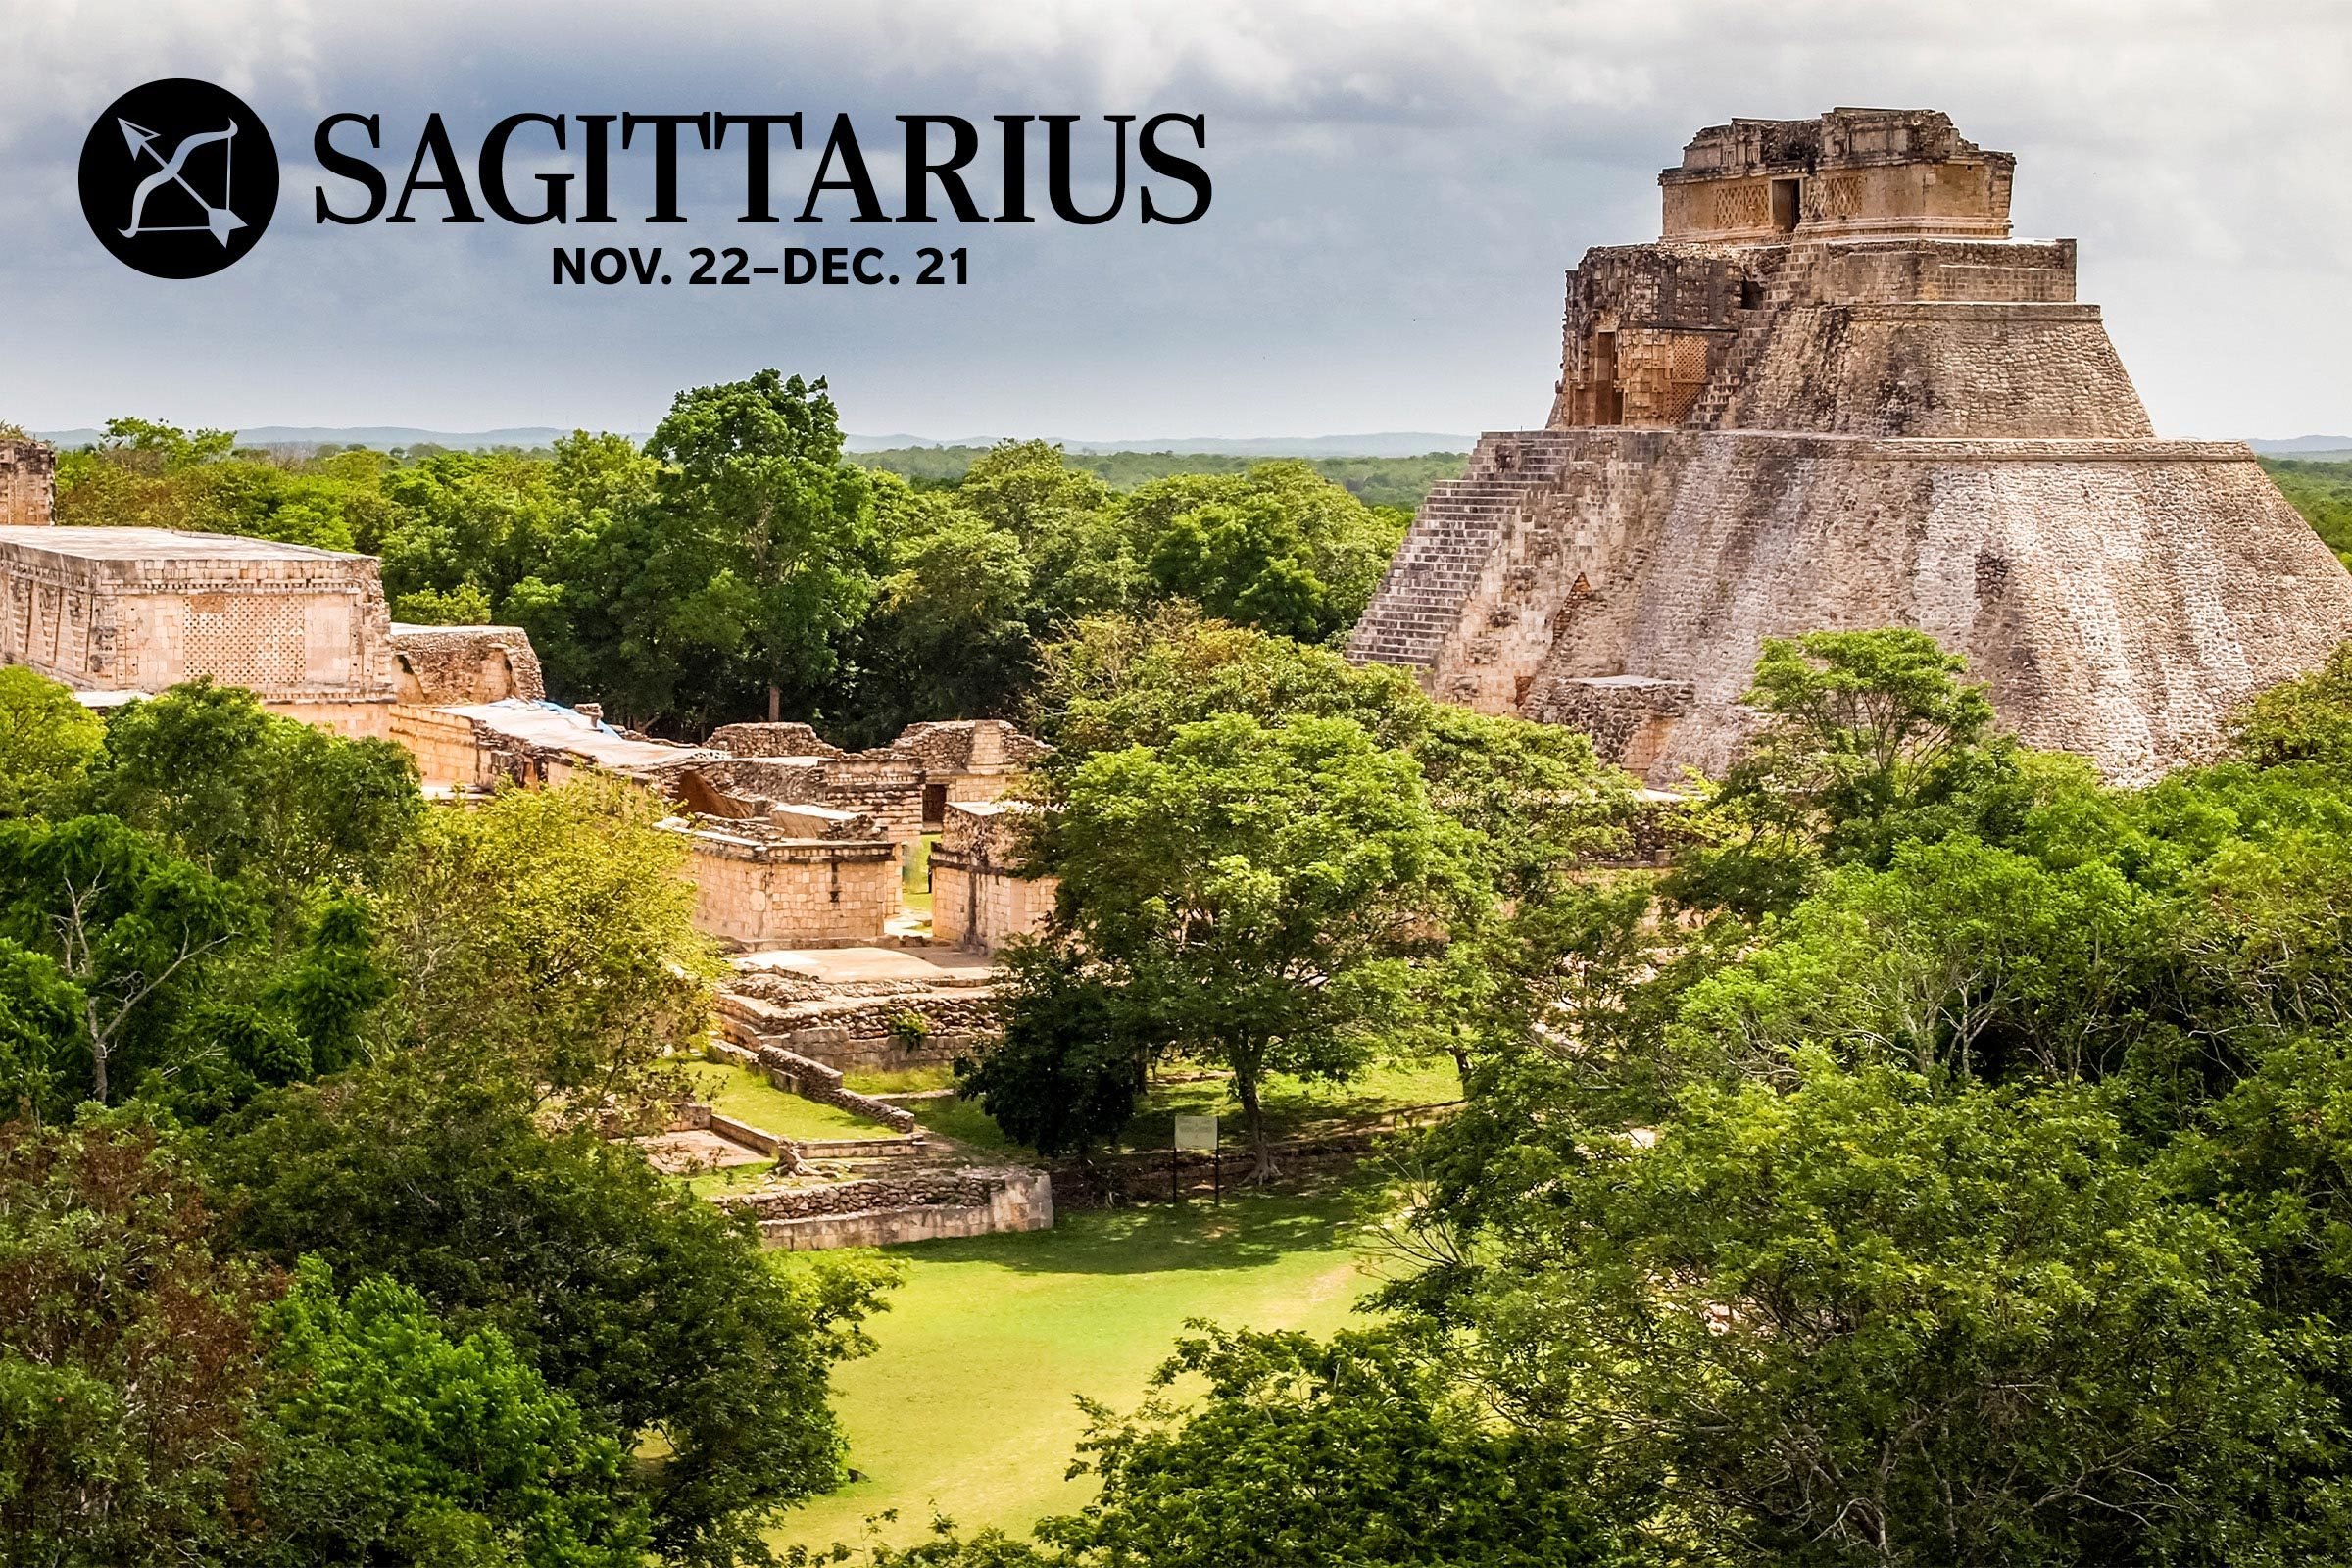 Rd Ideal Place To Travel Based On Your Zodiac Sign Sagittarius Gettyimages 1134708871